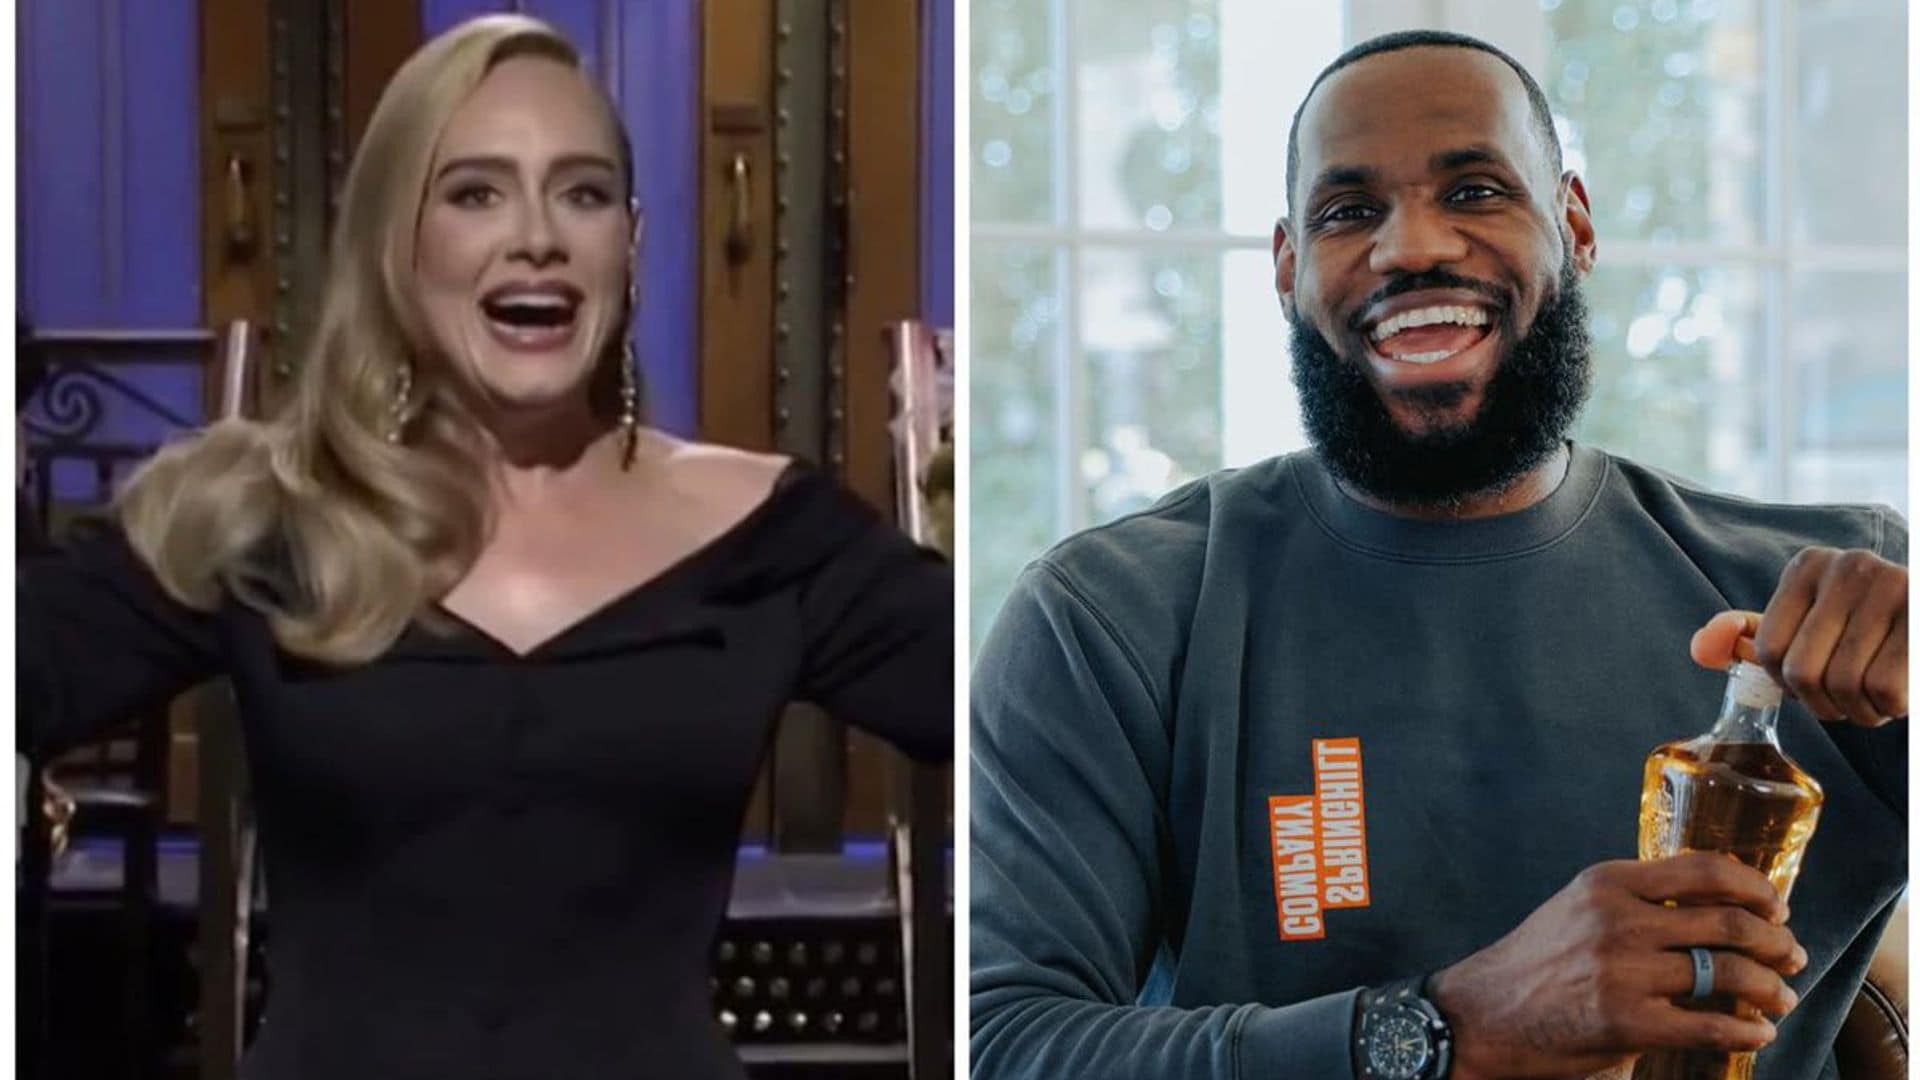 Watch Adele and LeBron James dancing Dominican music at Anthony Davis’s wedding